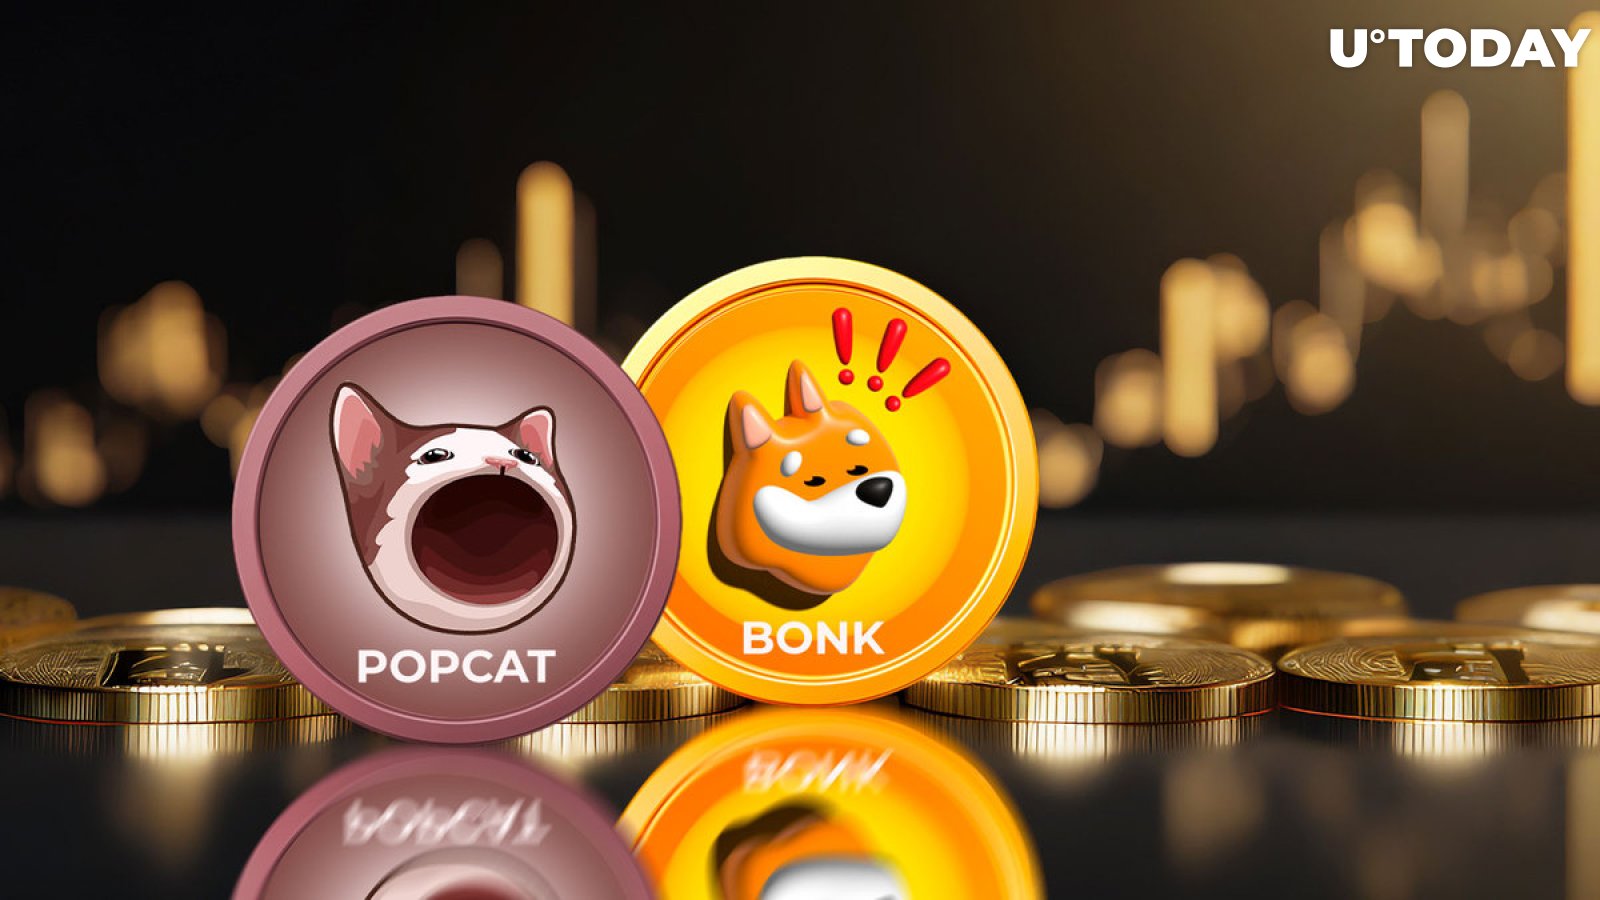 Meme Coins POPCAT, BONK on Fire With Double-Digit Gains Overnight